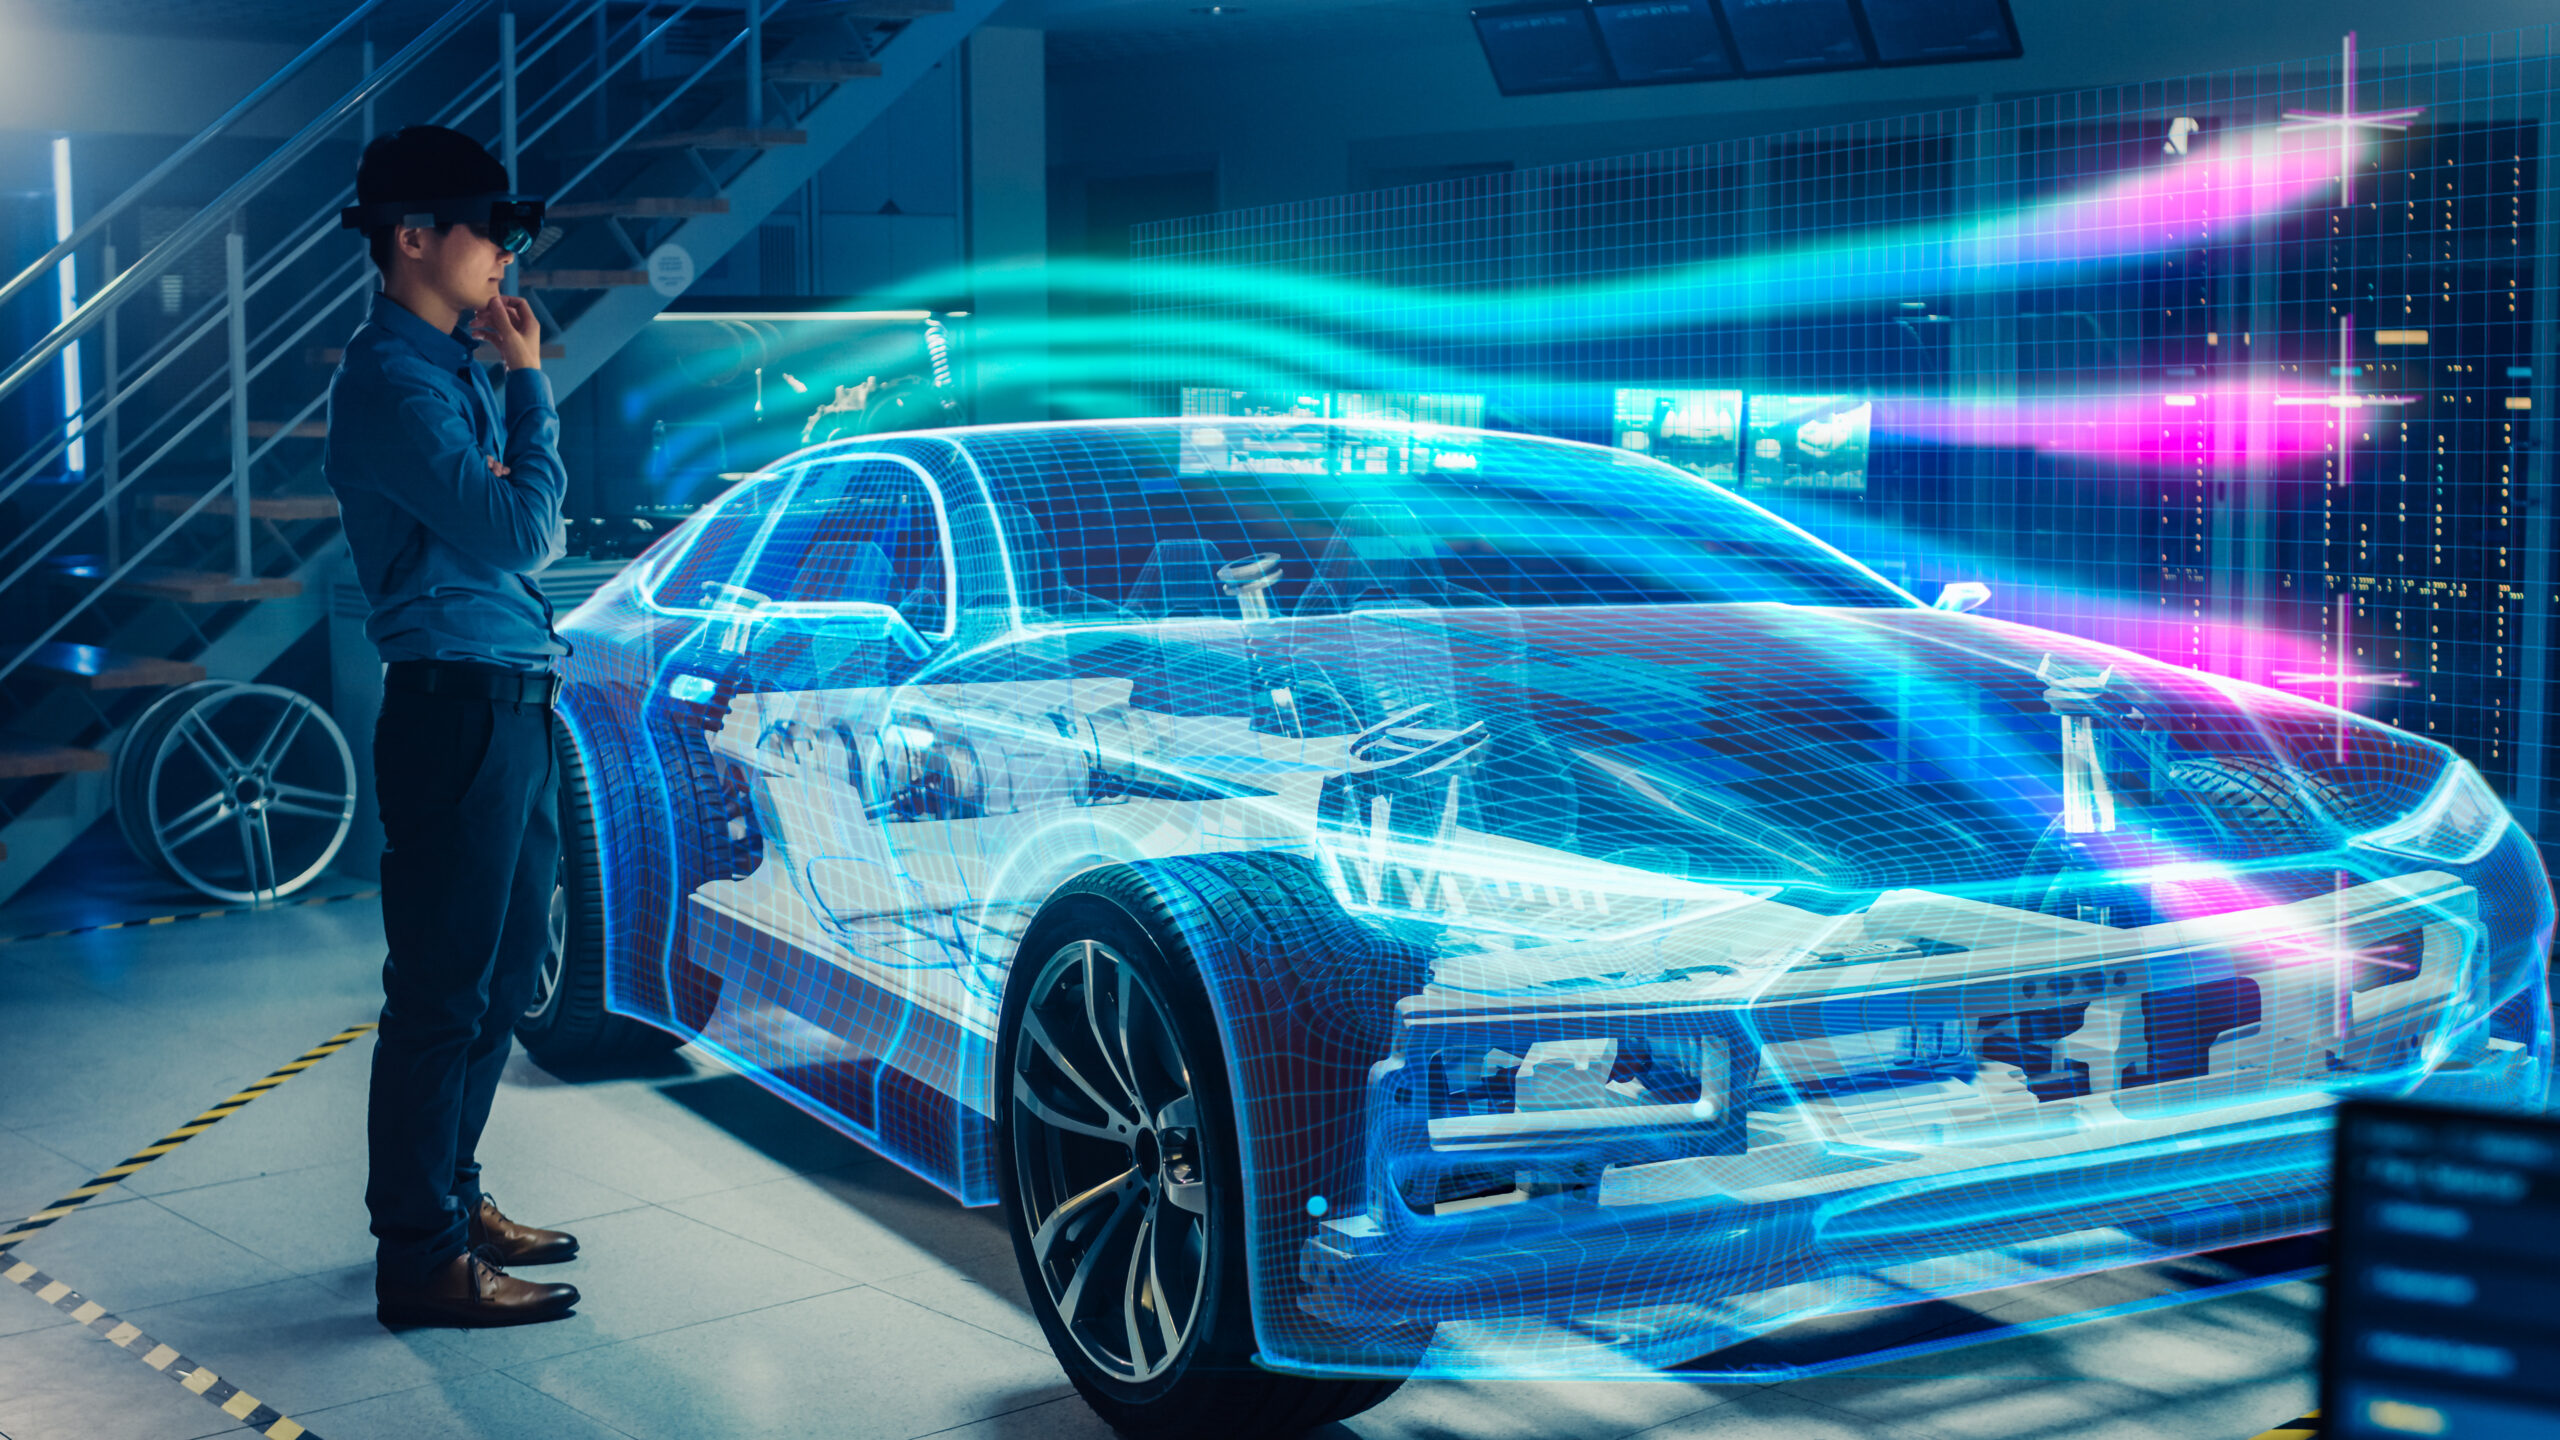 Digitalization helps companies adapt to COVID-19 restrictions, such as with AR and VR for vehicle design.